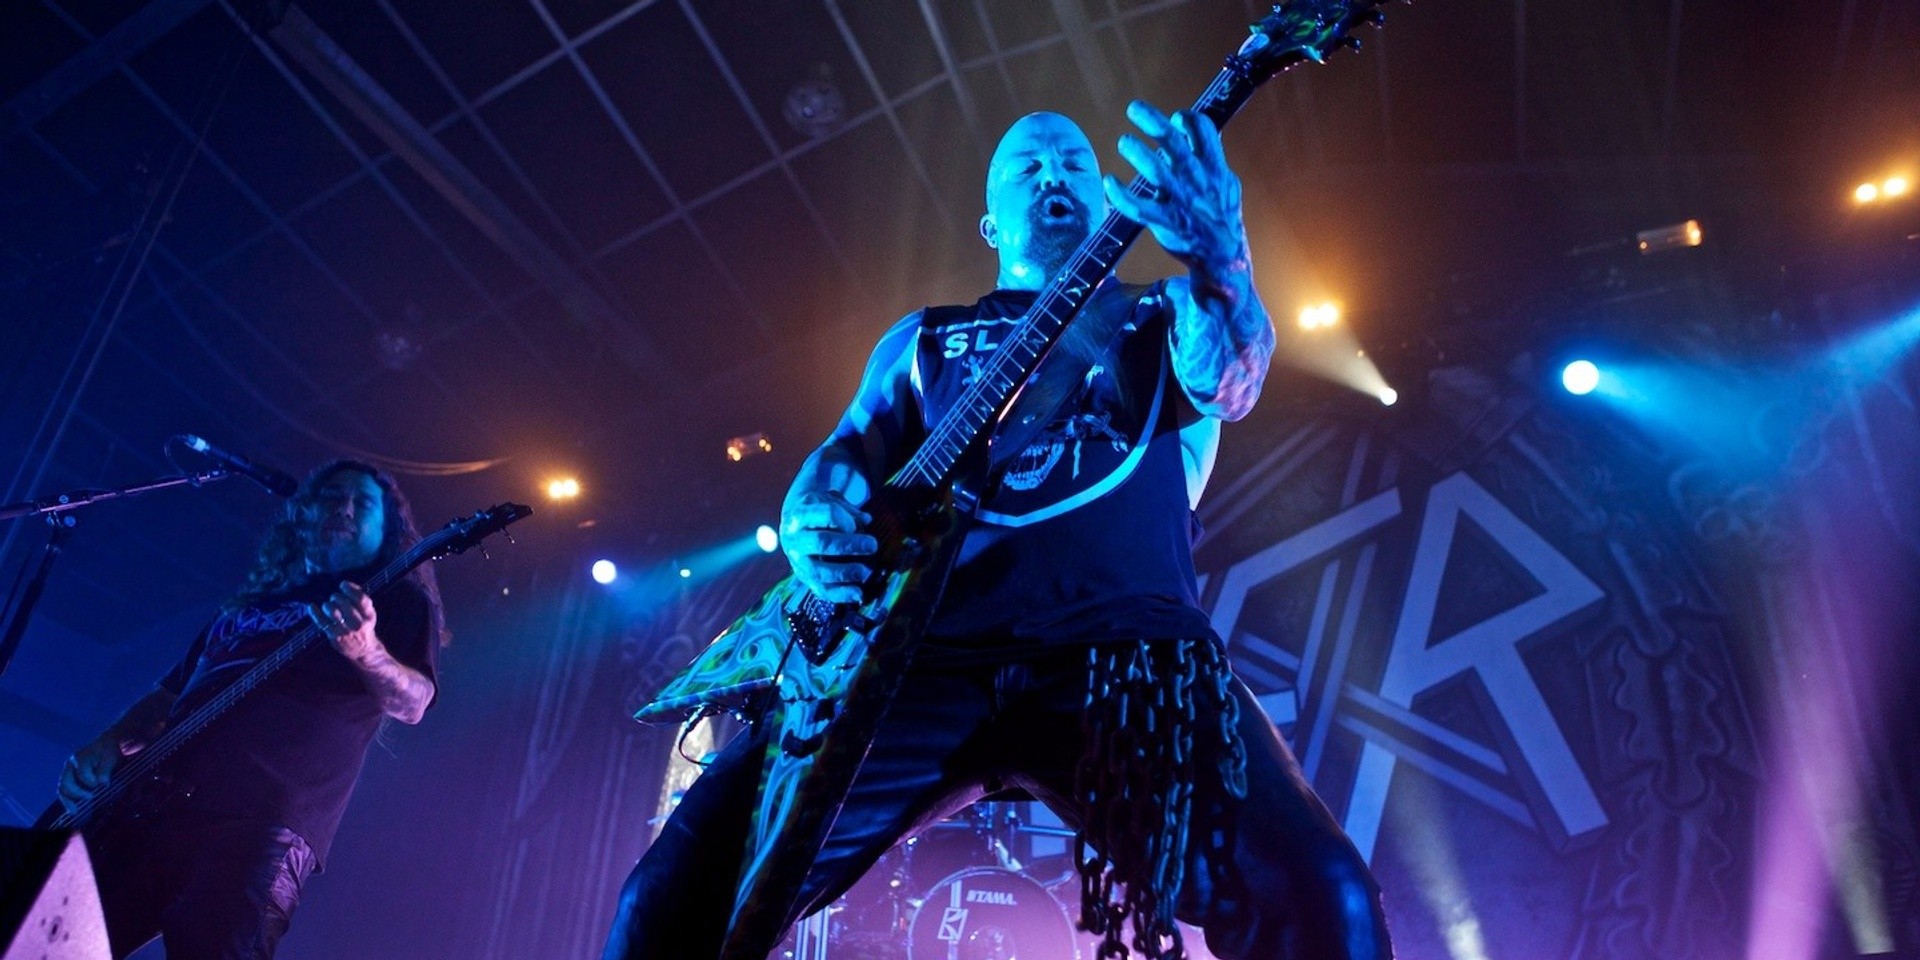 Slayer's show in Manila bans moshing and crowdsurfing